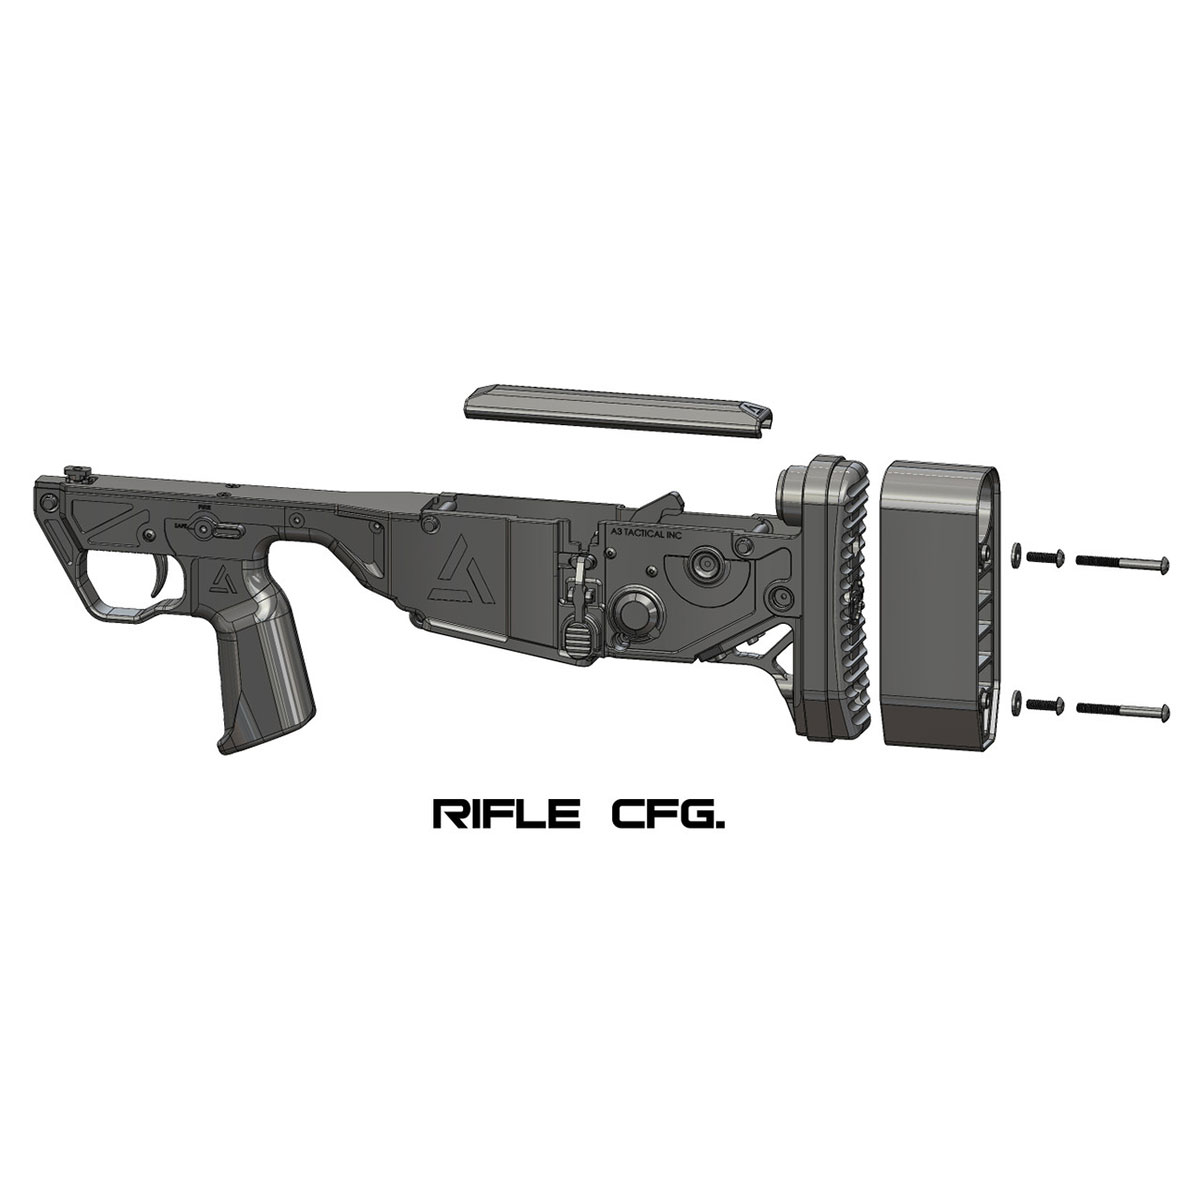 A3 TACTICAL - TRIAD BULLPUP CHASSIS FOR BRN-180 UPPER RECEIVER RIFLE